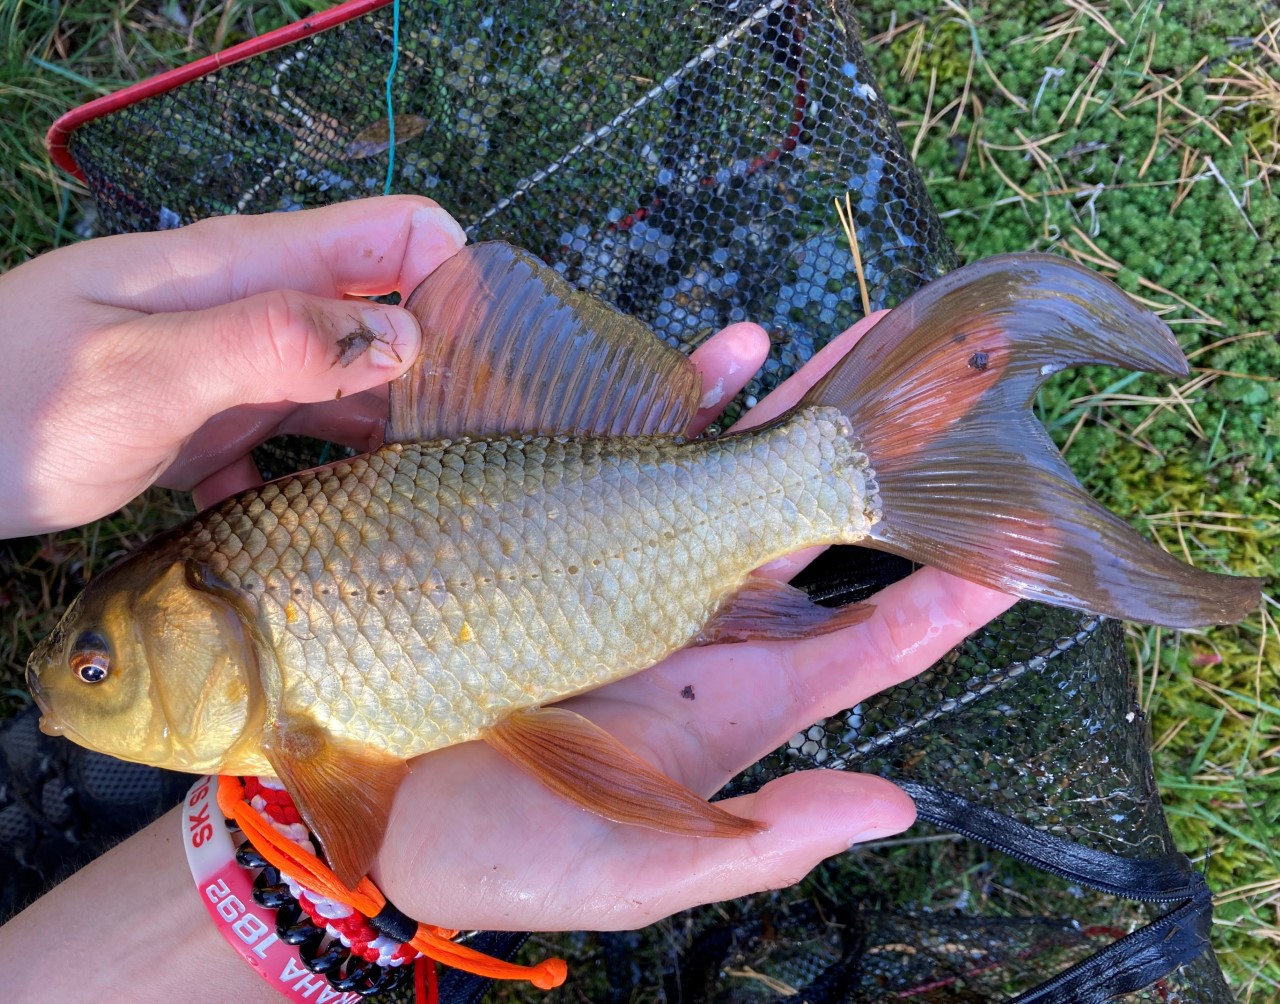 A hybrid between the crucian carp and gold fish.